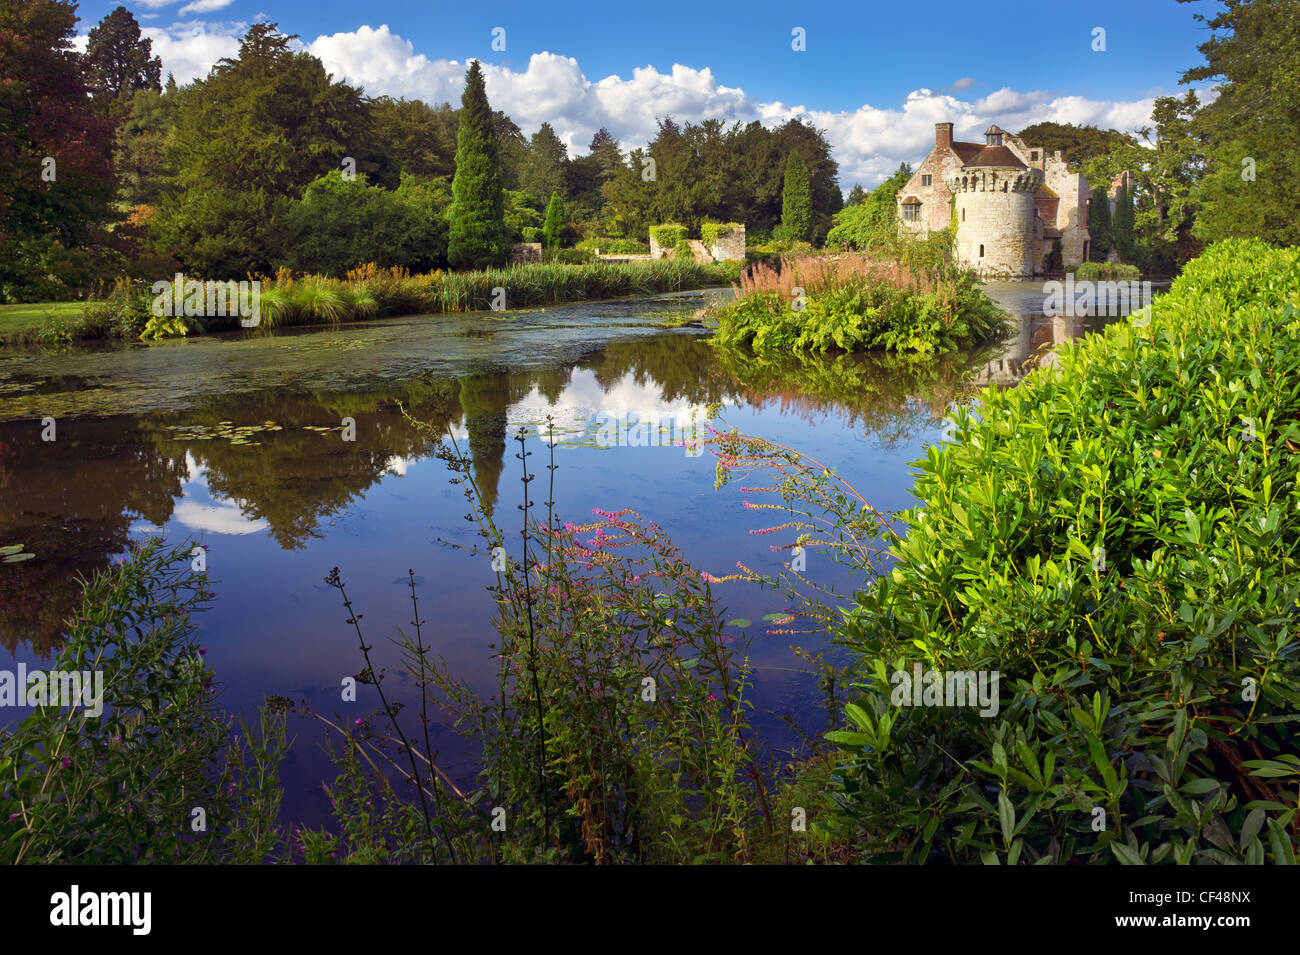 Scotney Old Castle, an English country house built by Roger Ashburnham in the 14th century. Stock Photo